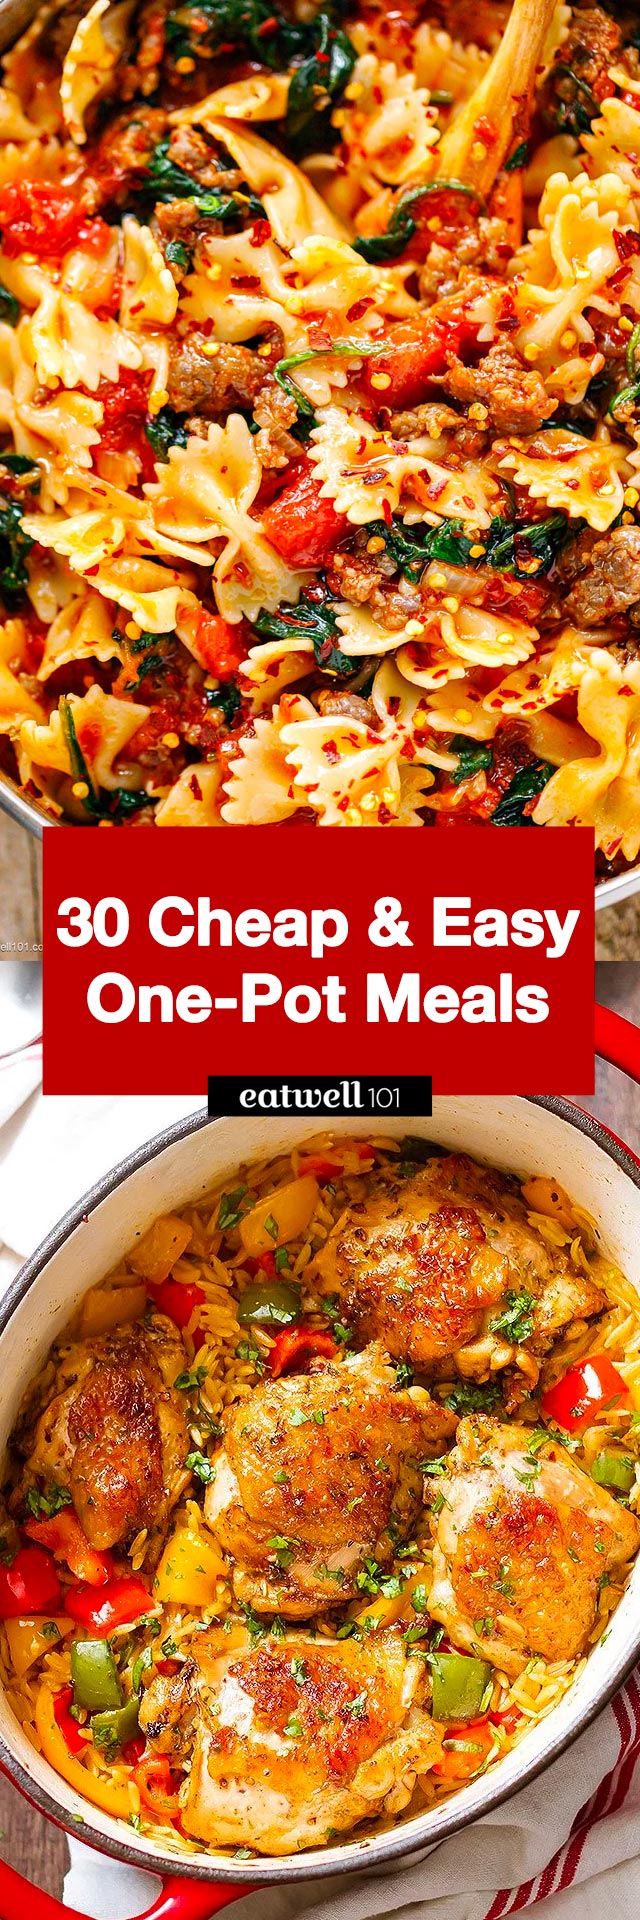 Easy Meals For One, Solo Dinner Ideas